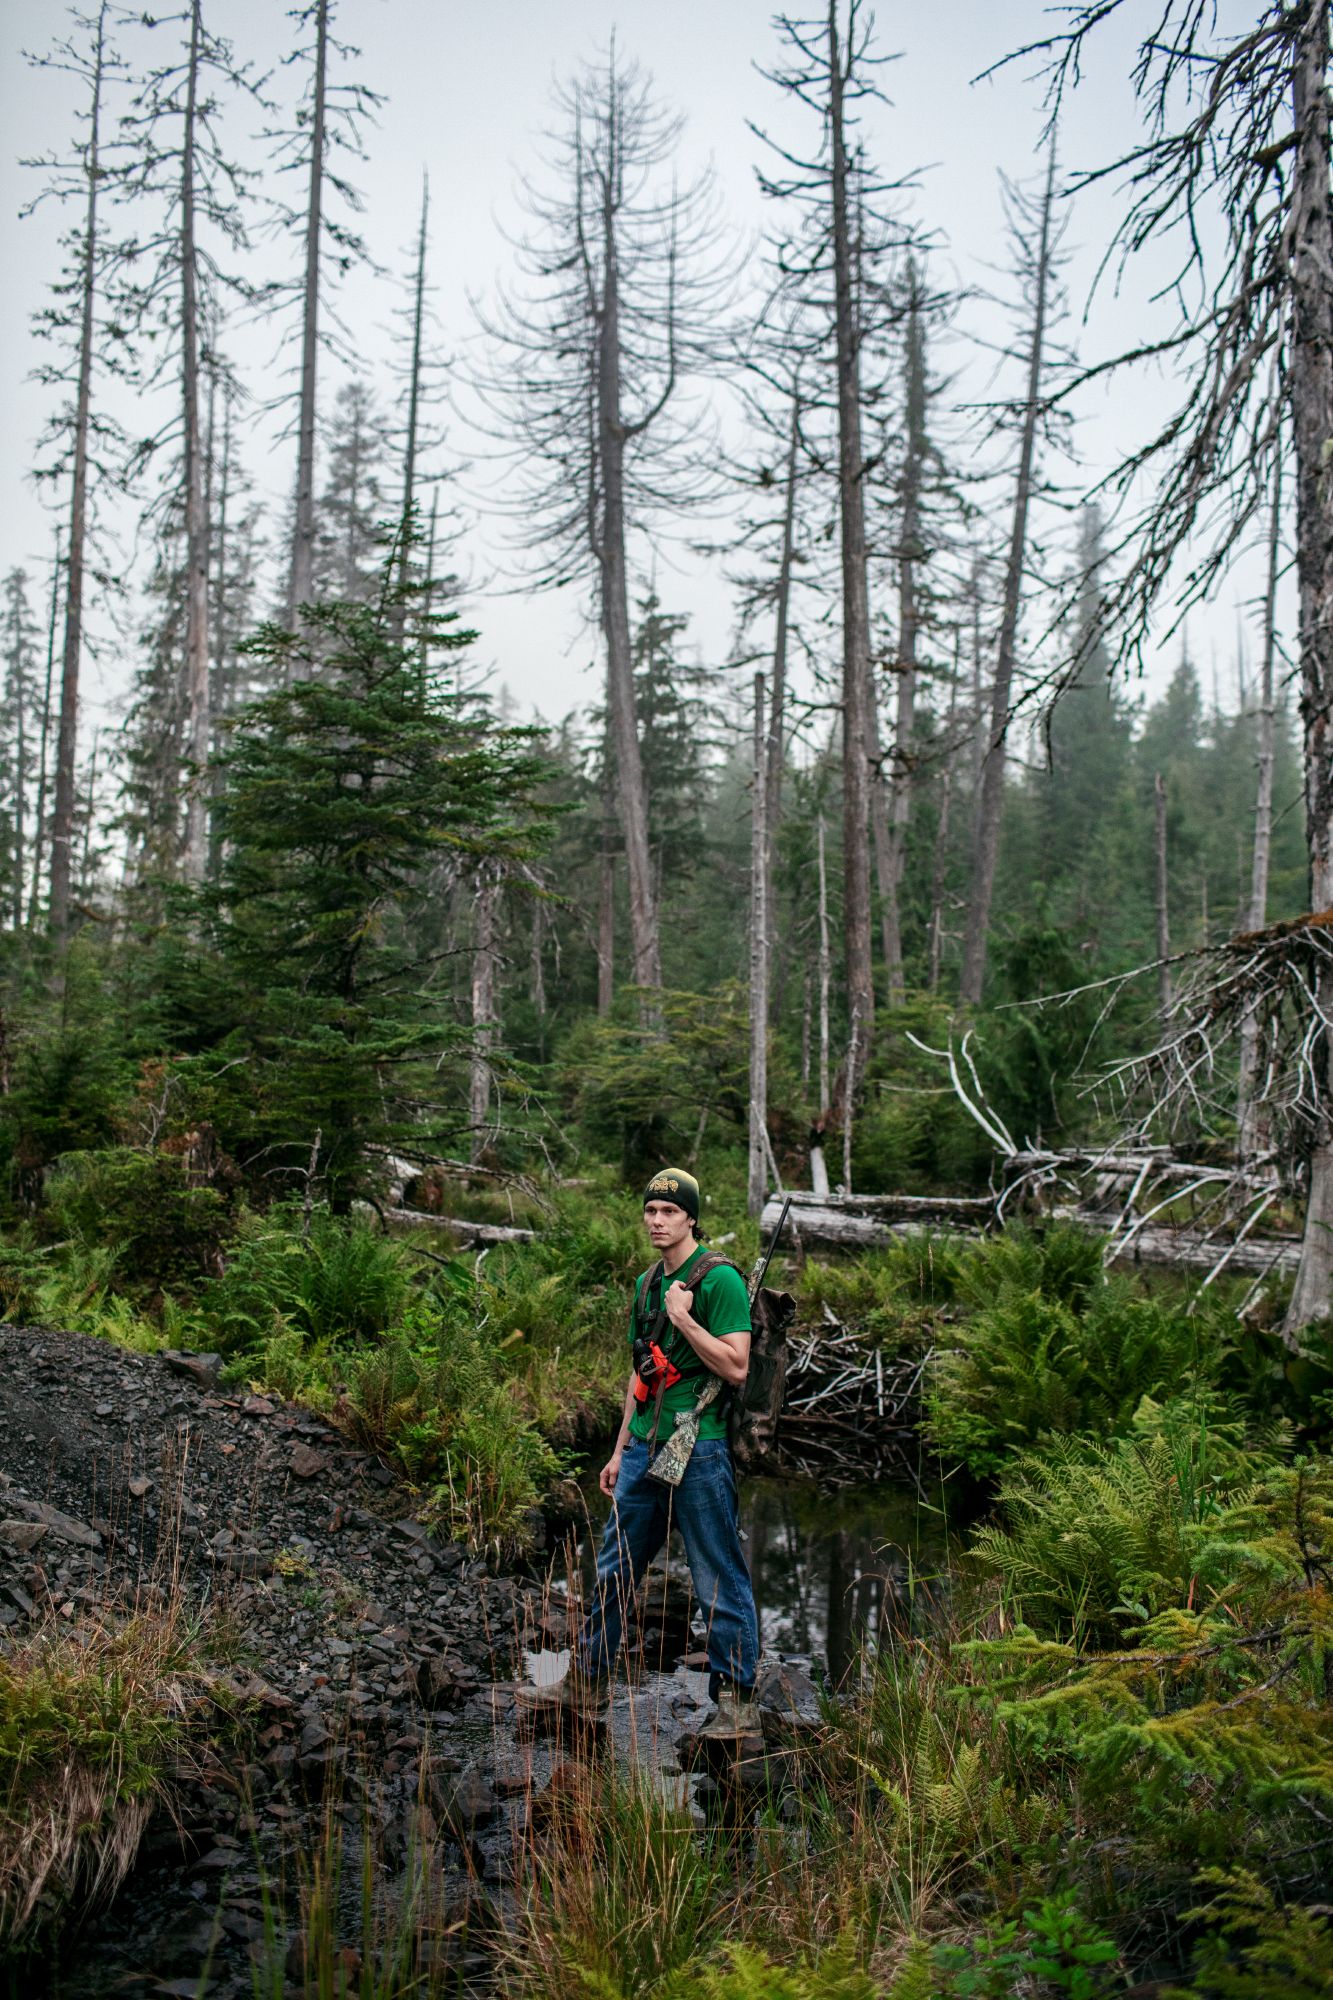 Hunting with Cory Petravich on Sealaska lands. Most Native communiites still depend heavily on subsistence hunting for food. Image by Joshua Cogan. United States, 2019.